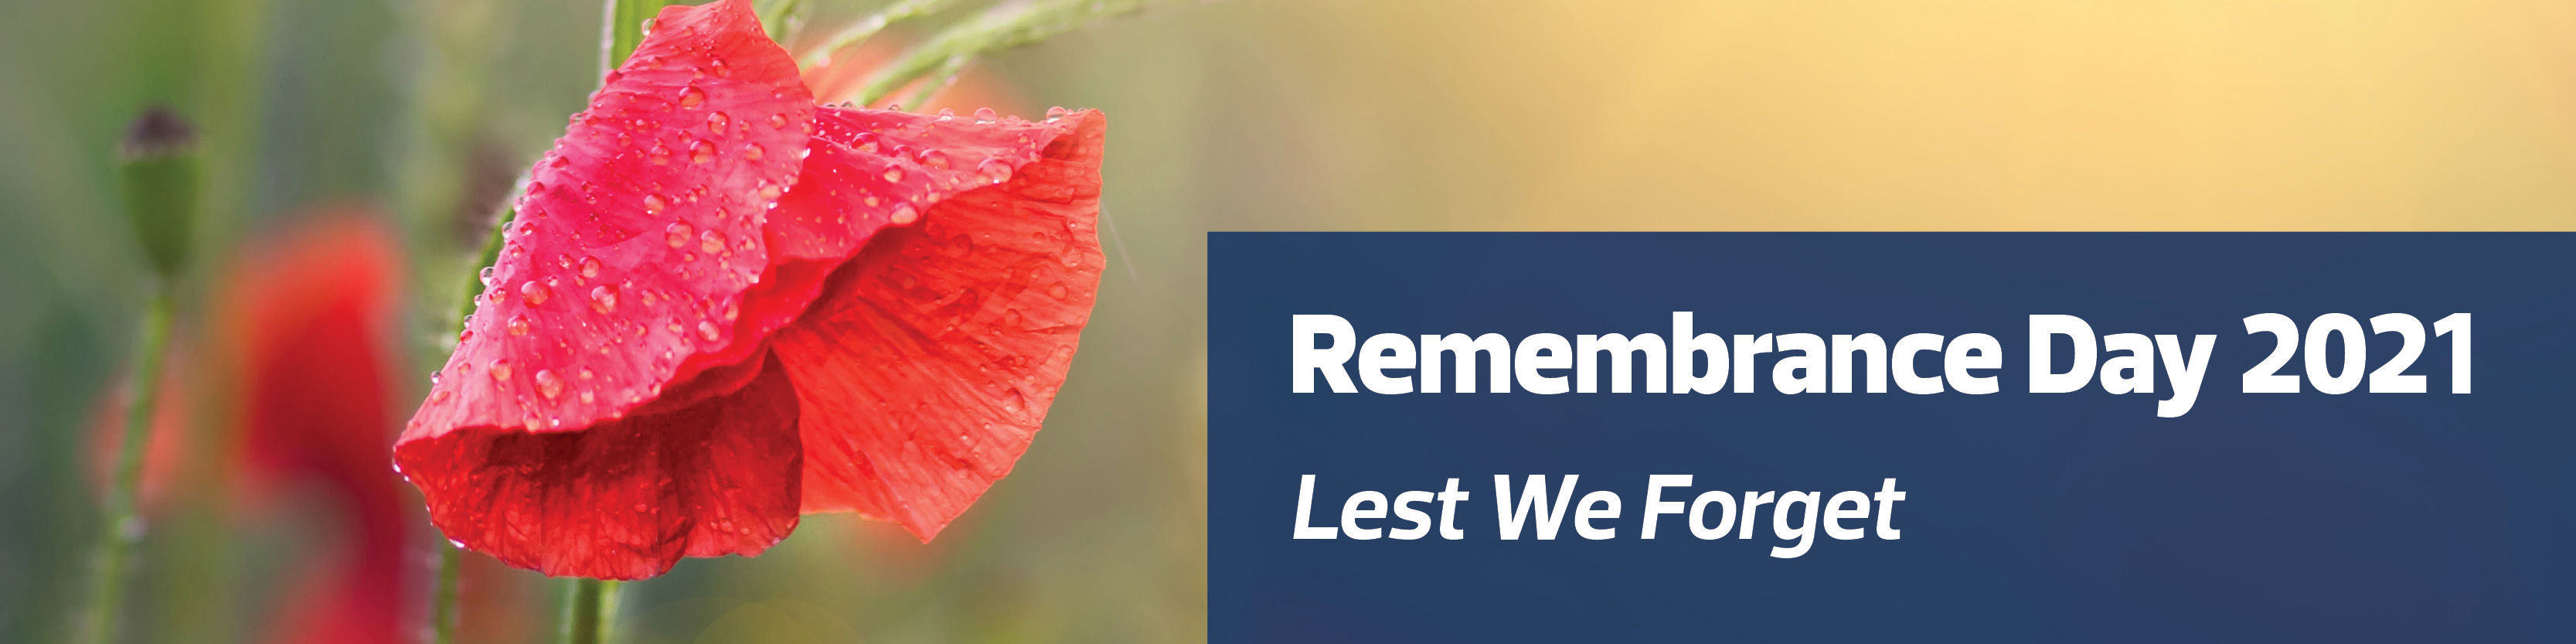 Remembrance Day 2021. Lest we forget.